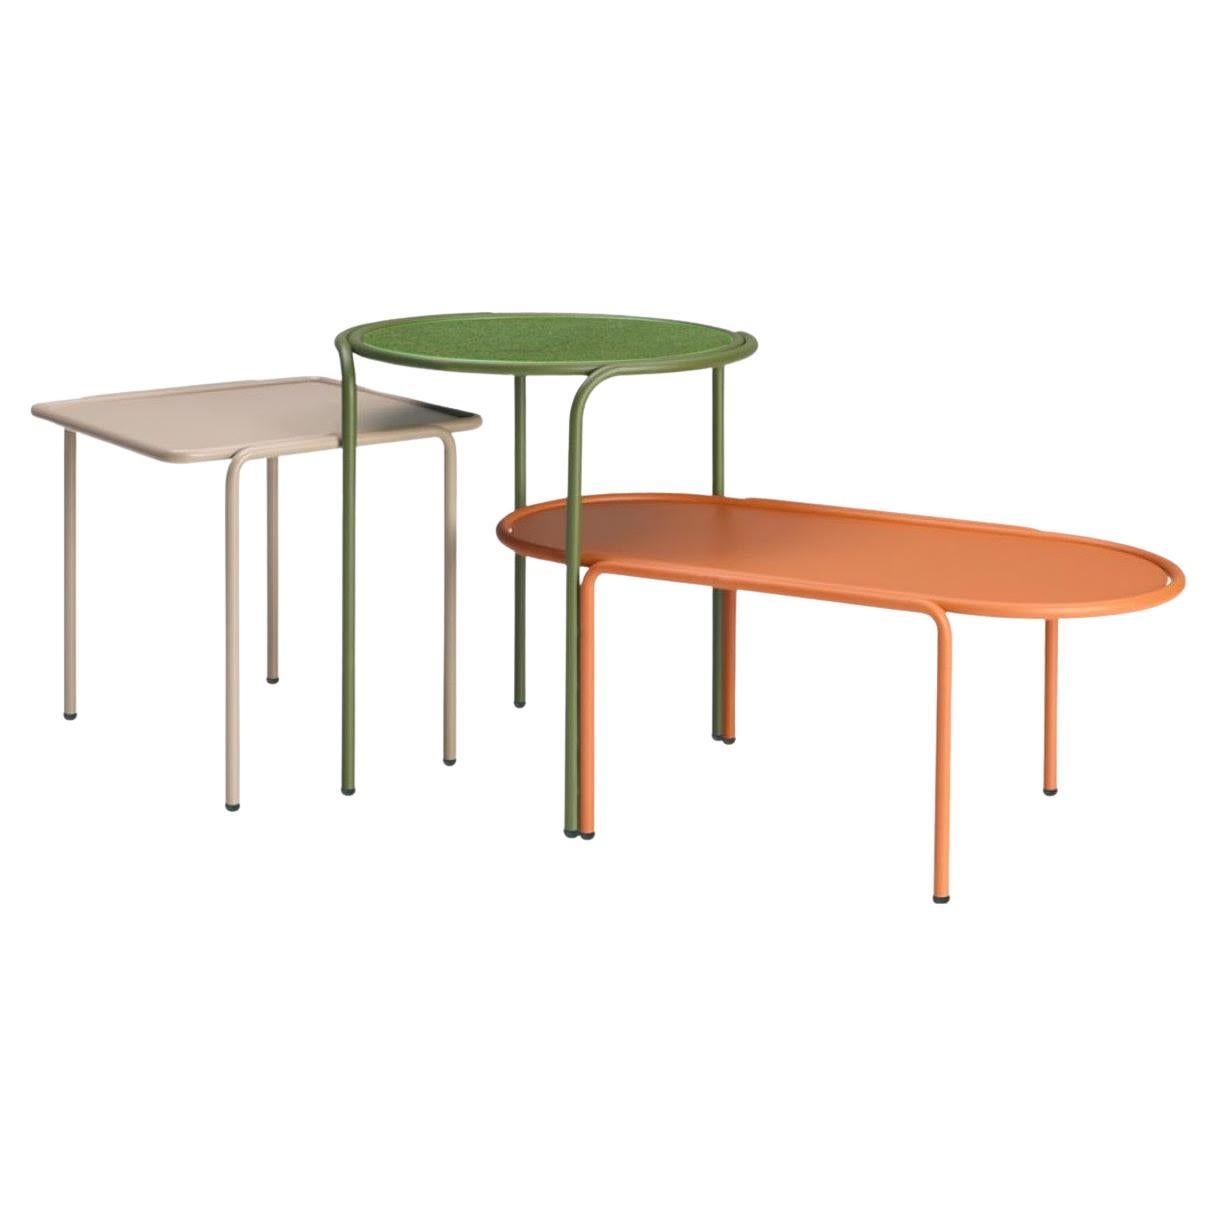 Three "Geometry" Design Tables with Metal or Laminate Tops, Indoor, Outdoor  For Sale